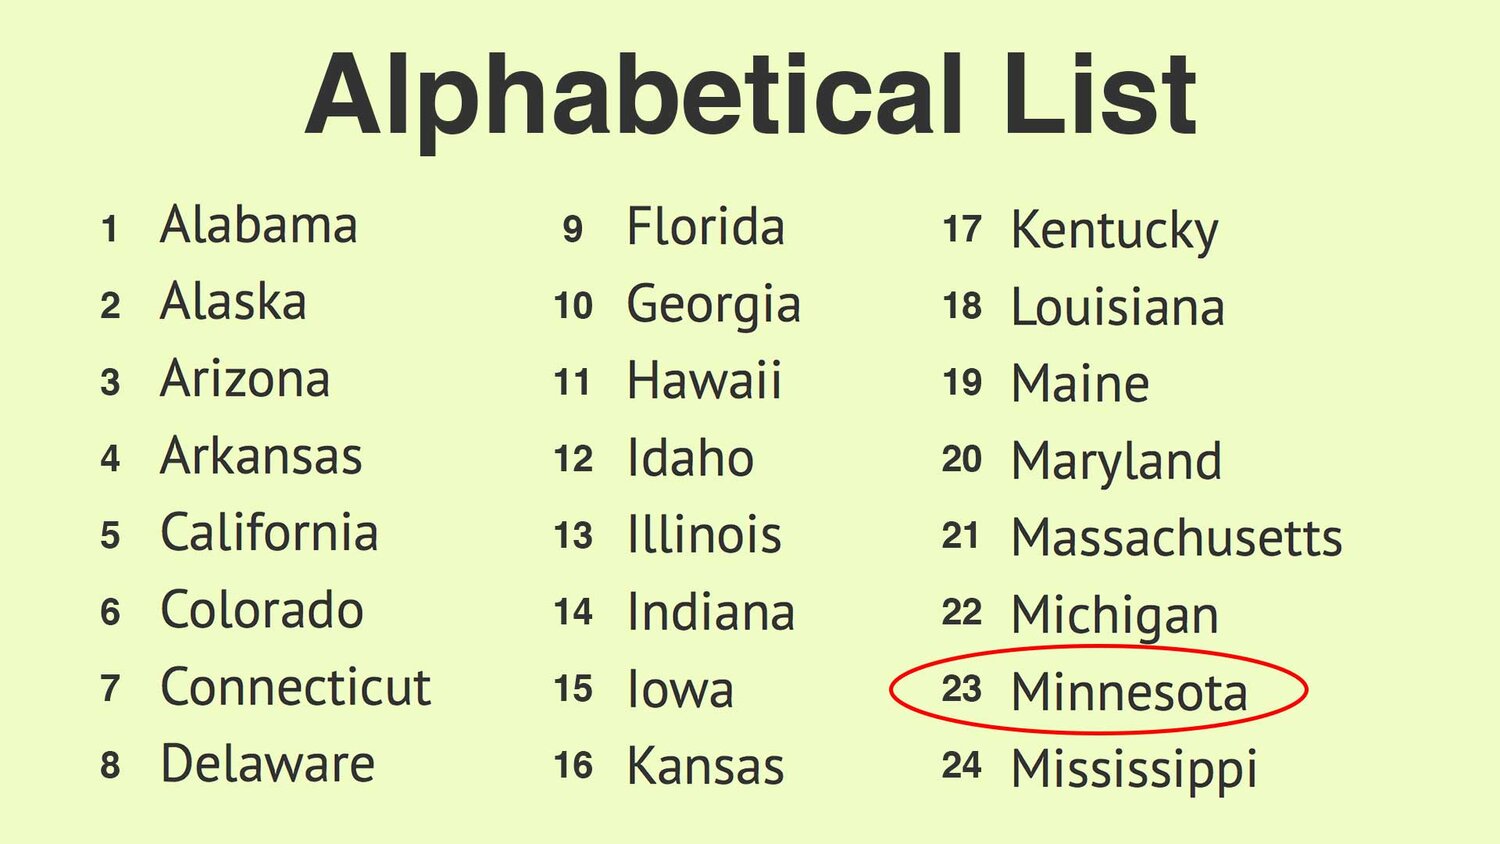 Minnesota-Ranks-A-Disappointing-23rd-In-Alphabetical-List-of-States.jpg